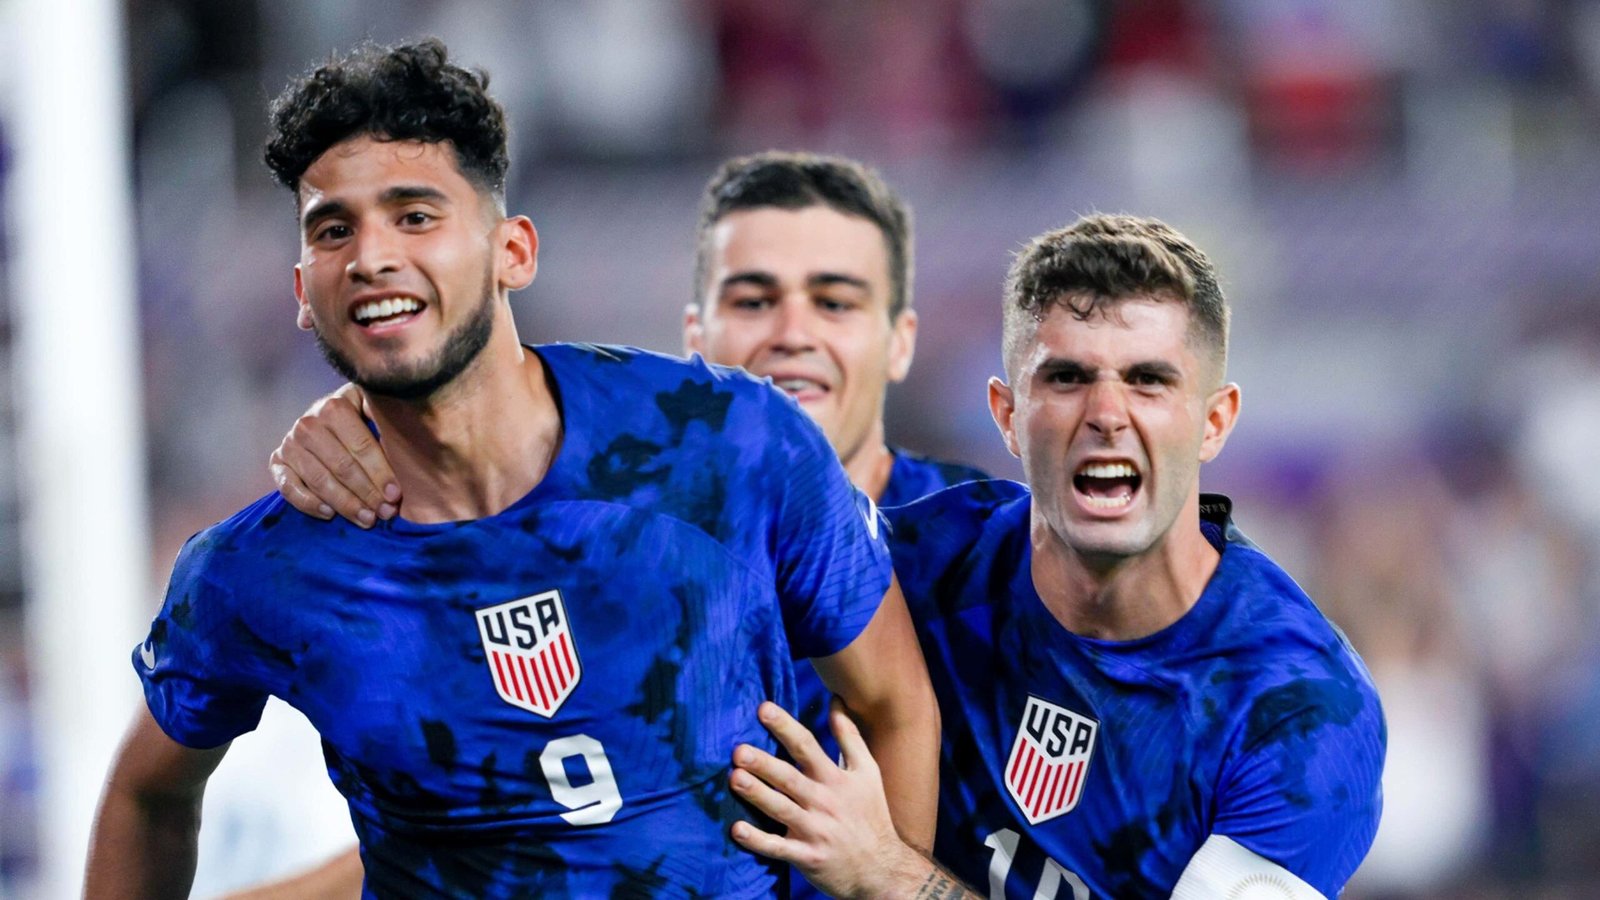 Where to watch United States Men's National Soccer Team vs Mexico National Football Team?